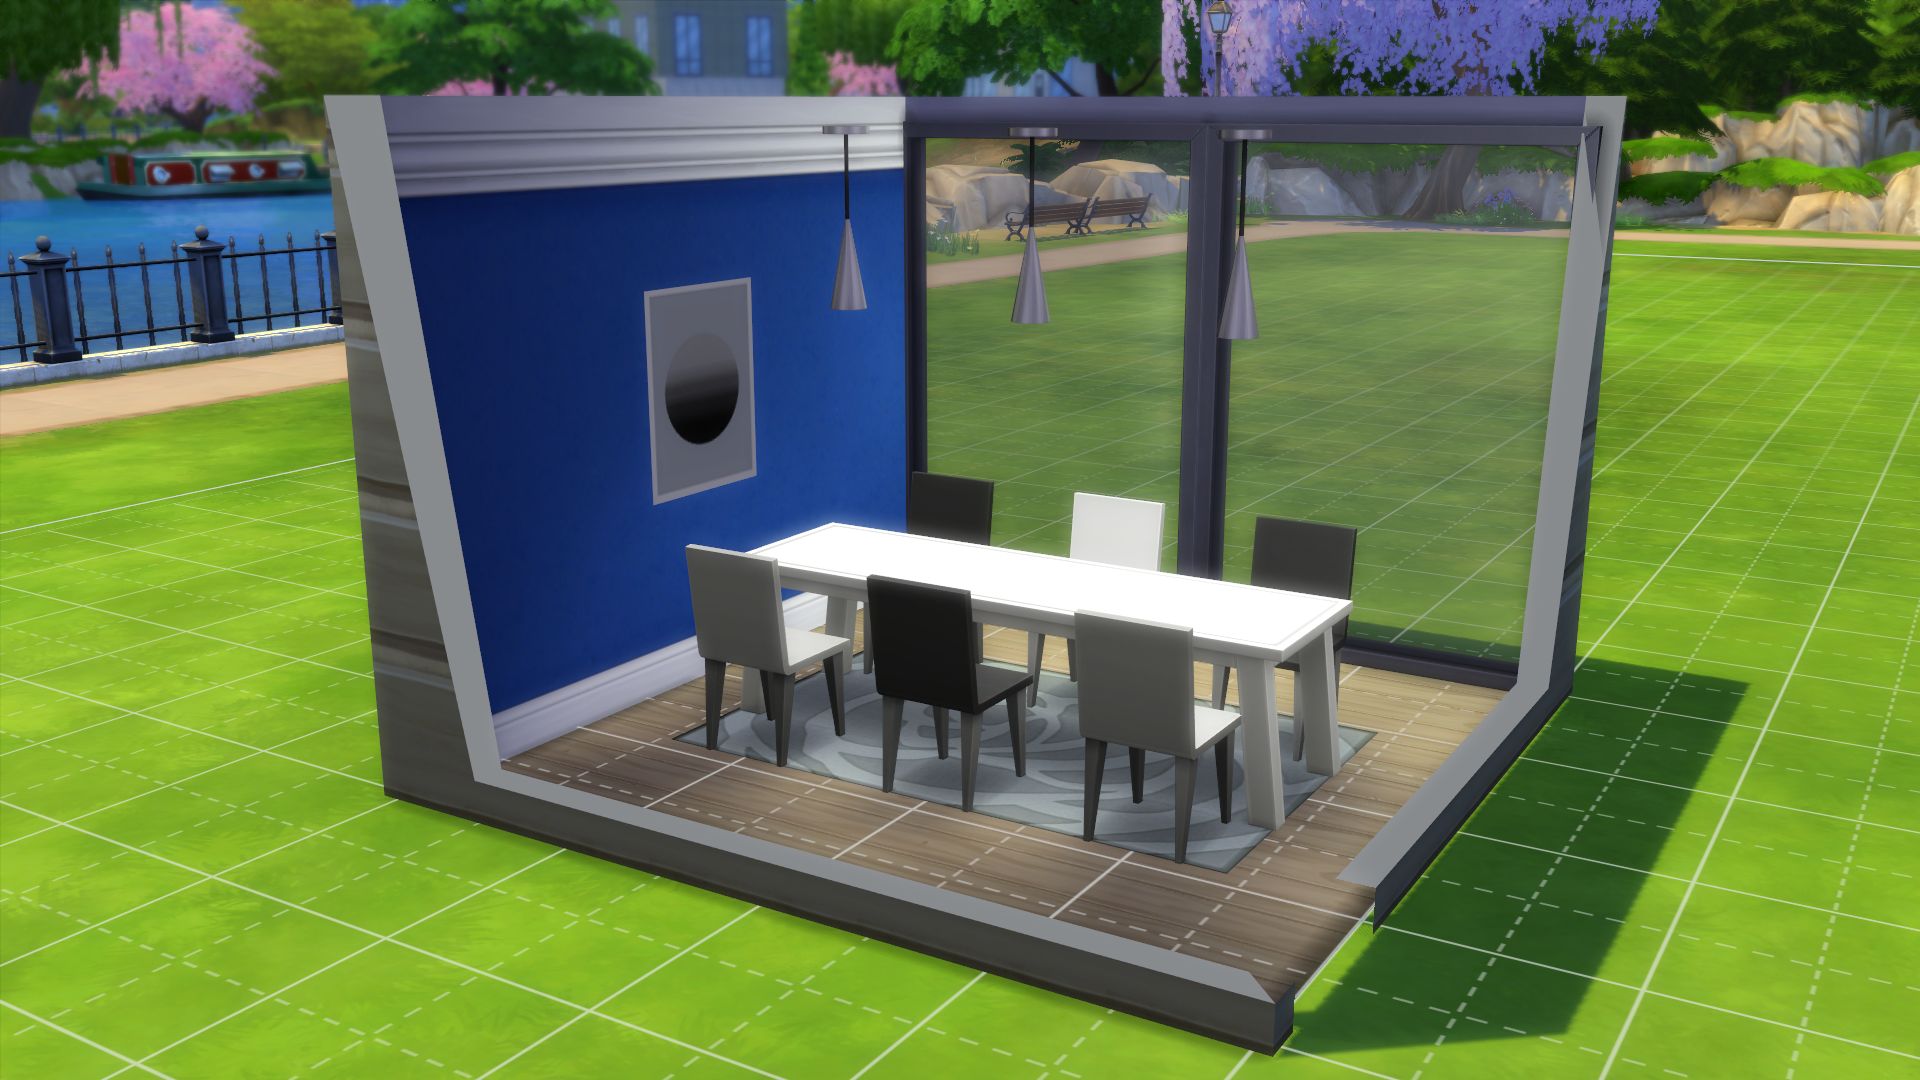 https://www.carls-sims-4-guide.com/gamepictures/stuffpacks/coolkitchen/large/StyledRoom2.jpg